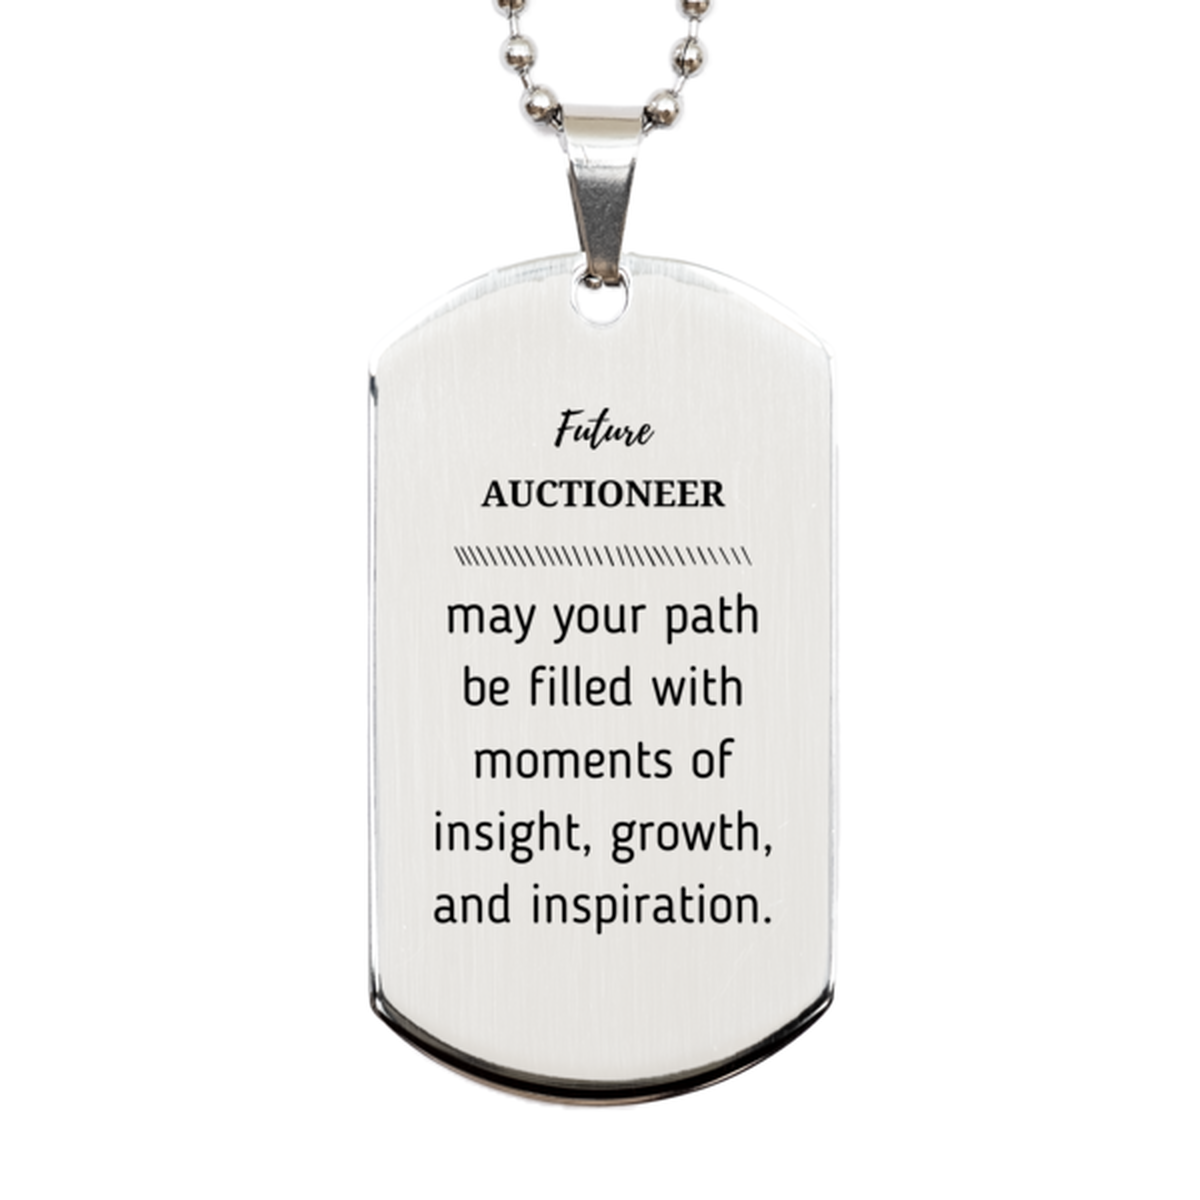 Future Auctioneer Gifts, May your path be filled with moments of insight, Graduation Gifts for New Auctioneer, Christmas Unique Silver Dog Tag For Men, Women, Friends